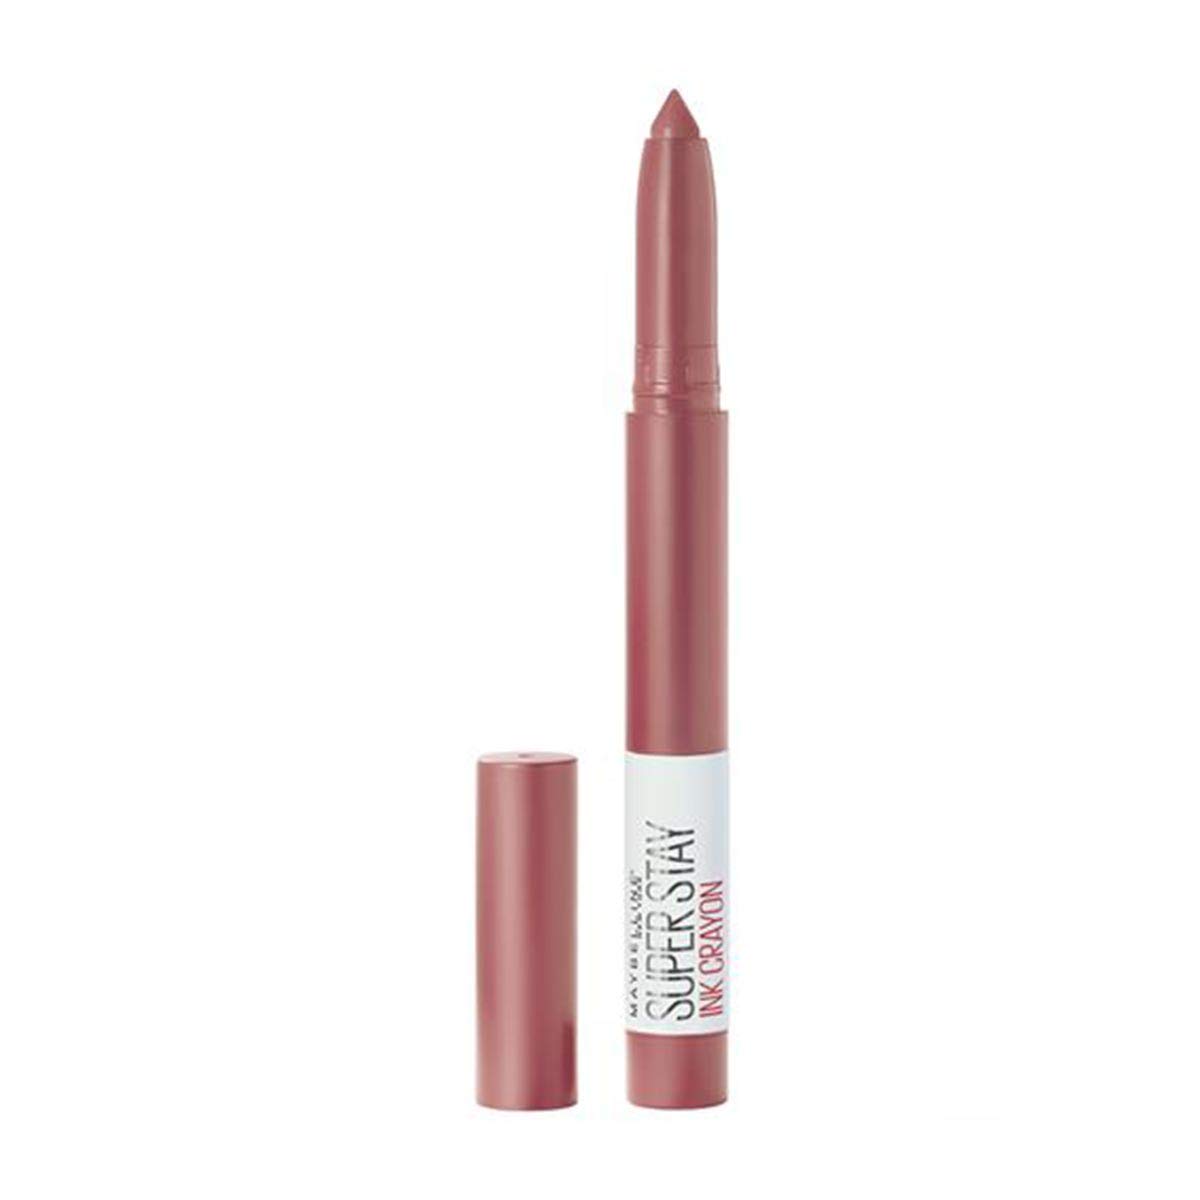 maybelline superstay ink crayon in lead the way dupe